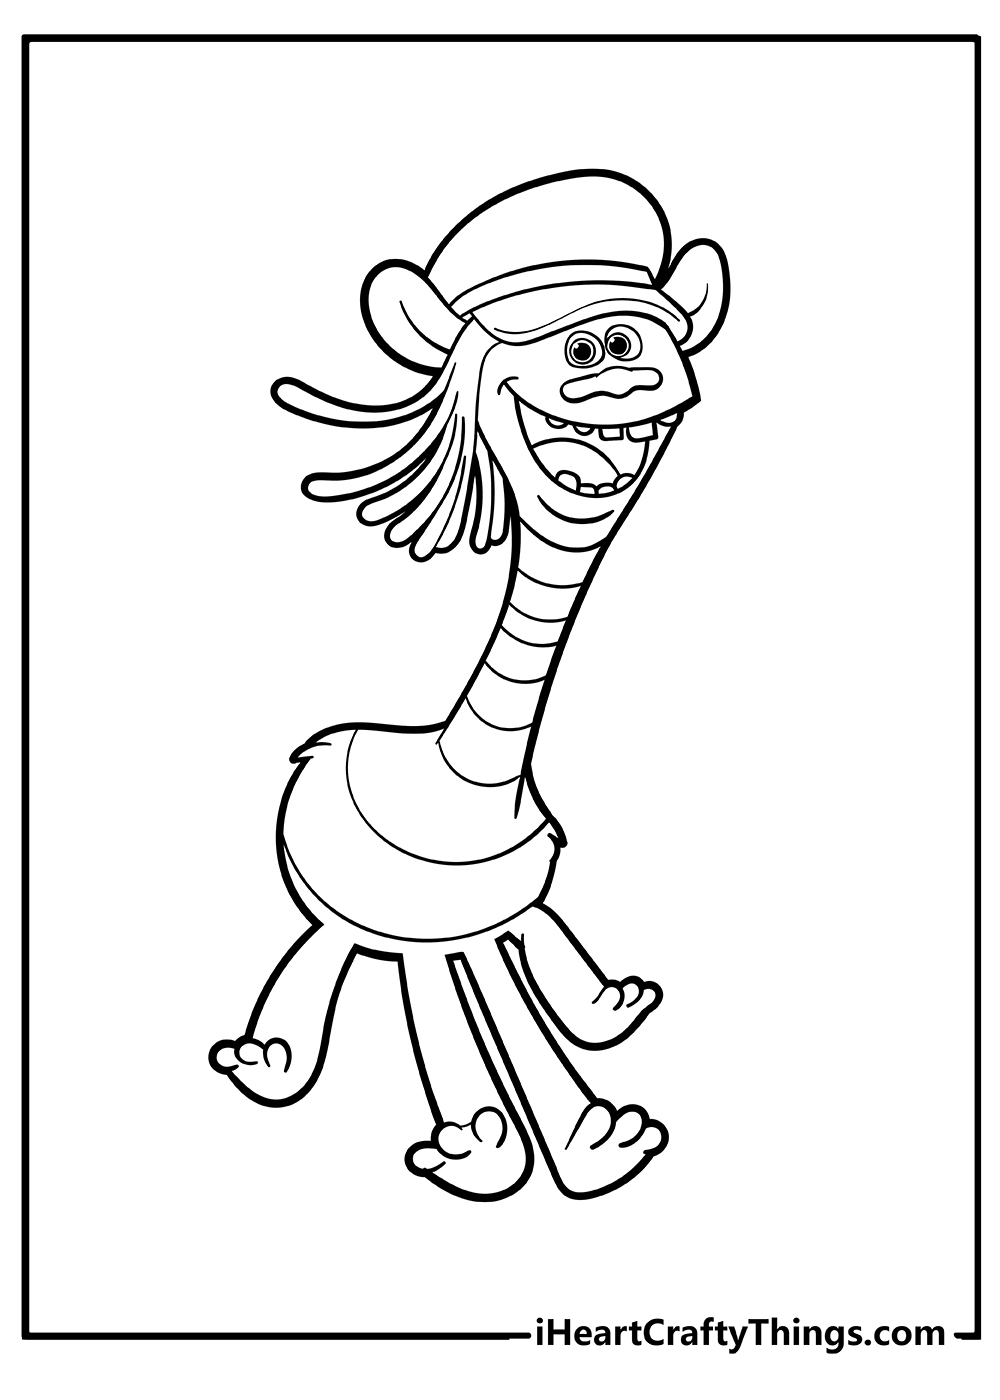 Troll Coloring Pages for preschoolers free printable